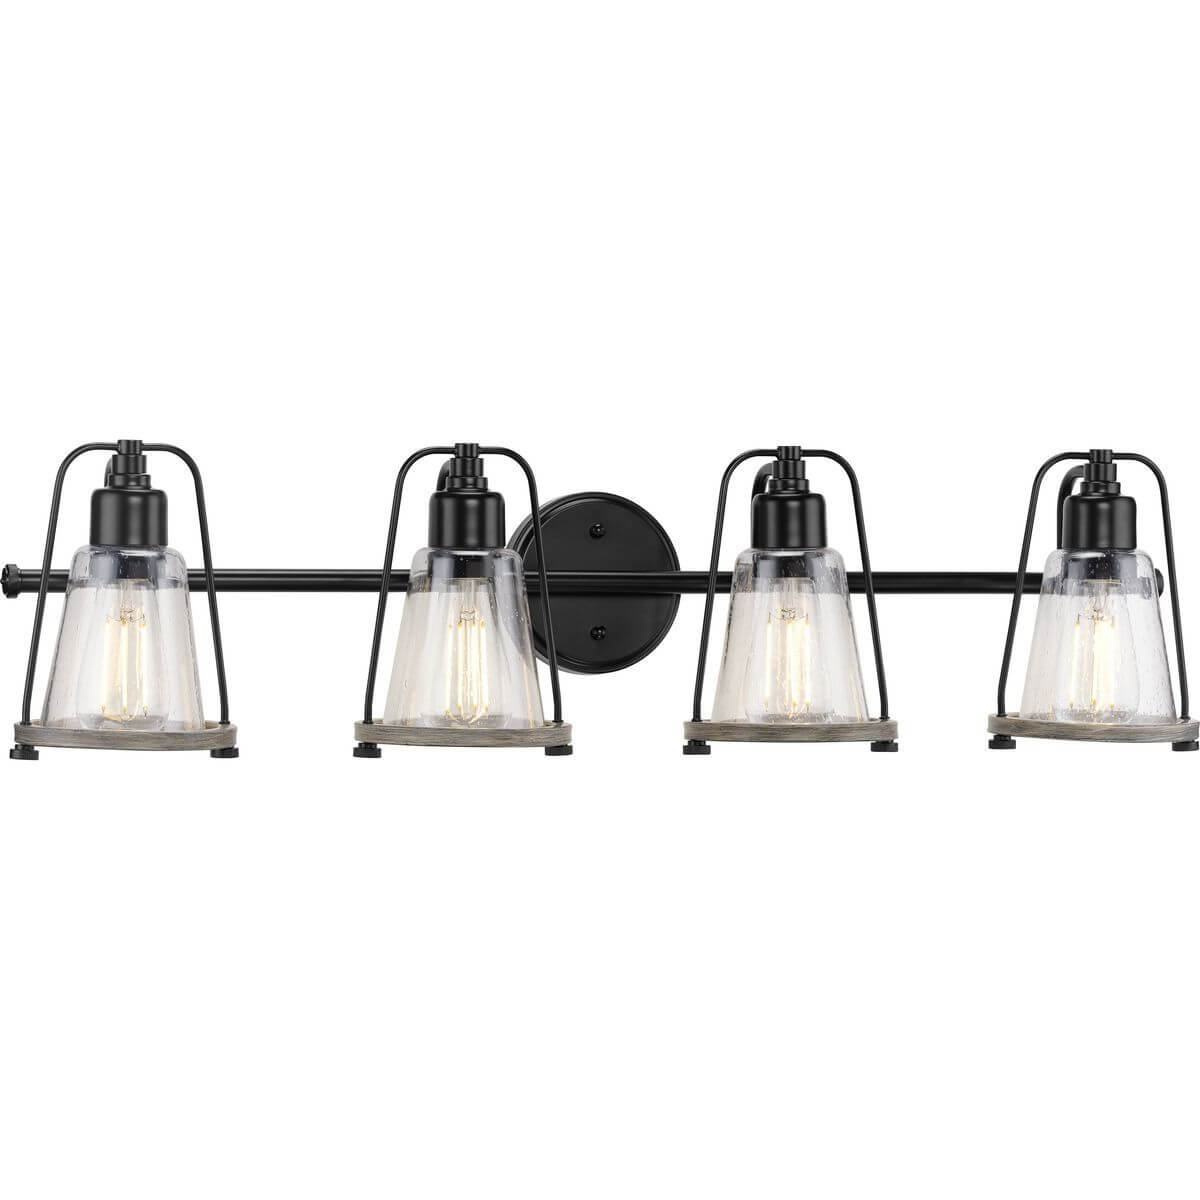 Progress Lighting P300298-031 Conway 4 Light 33 inch Bath Vanity Light in Matte Black with Clear Seeded Glass